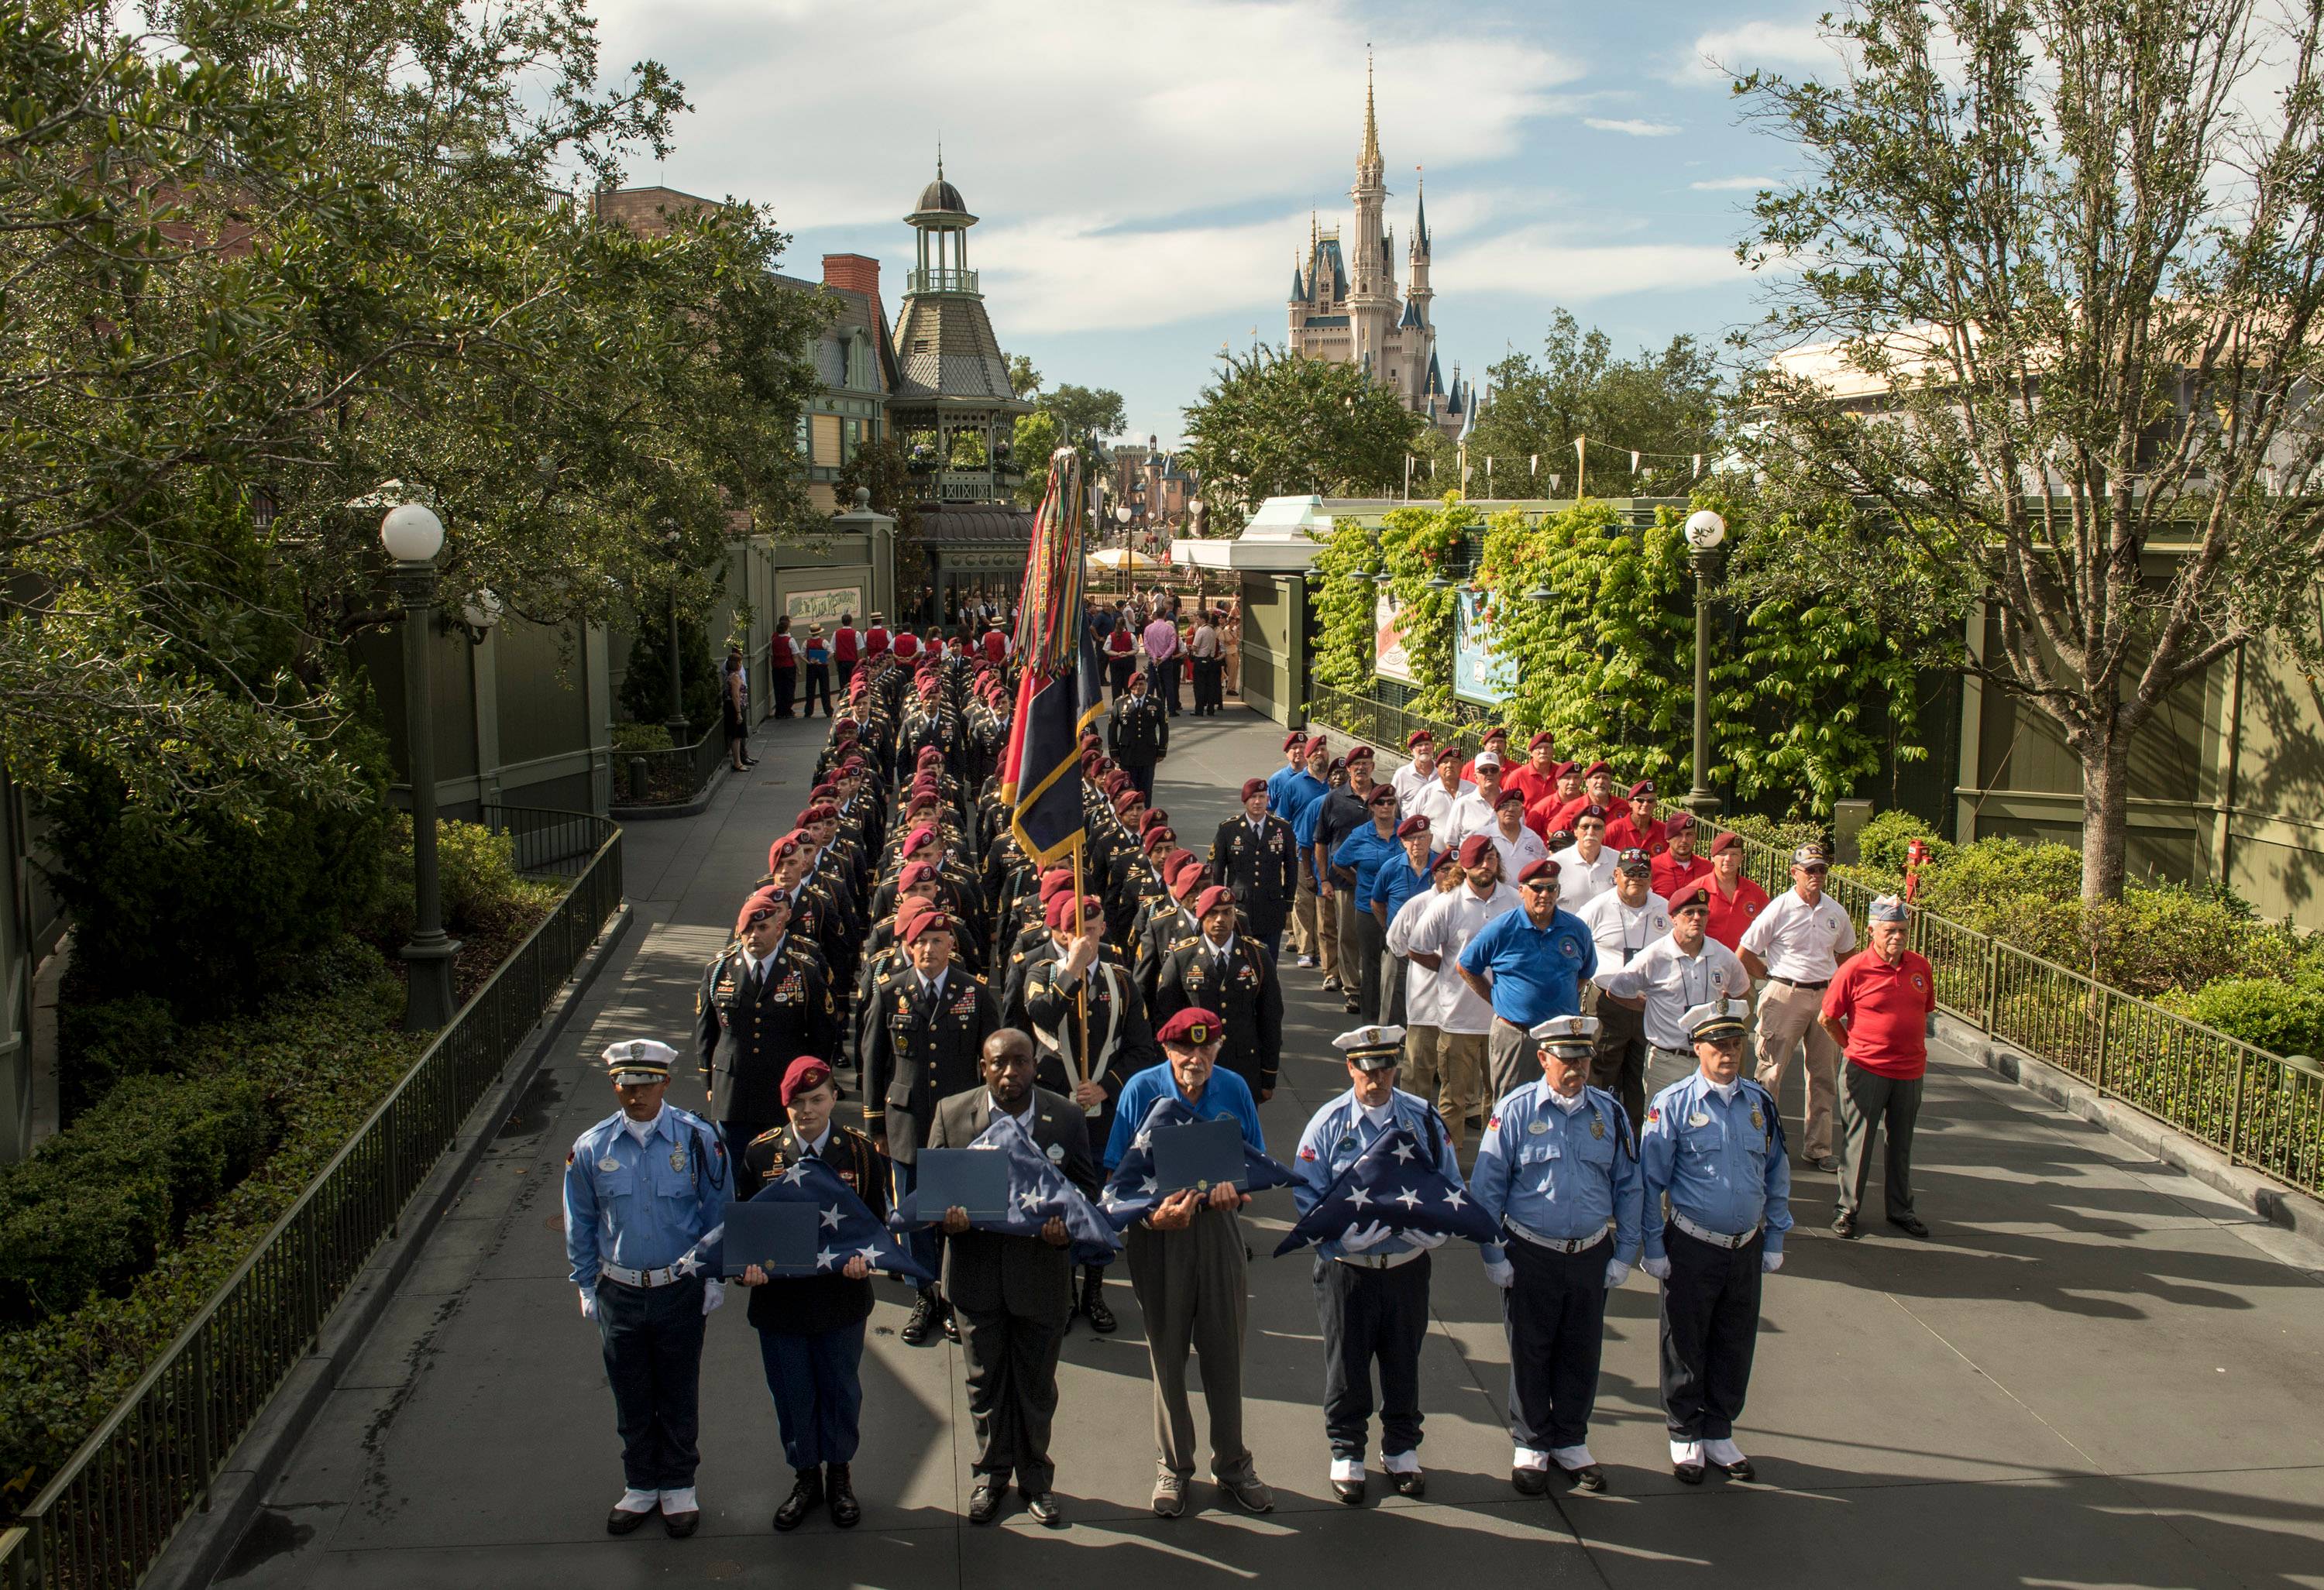 U.S. Army's 82nd Airborne Division Celebrated at Walt Disney World